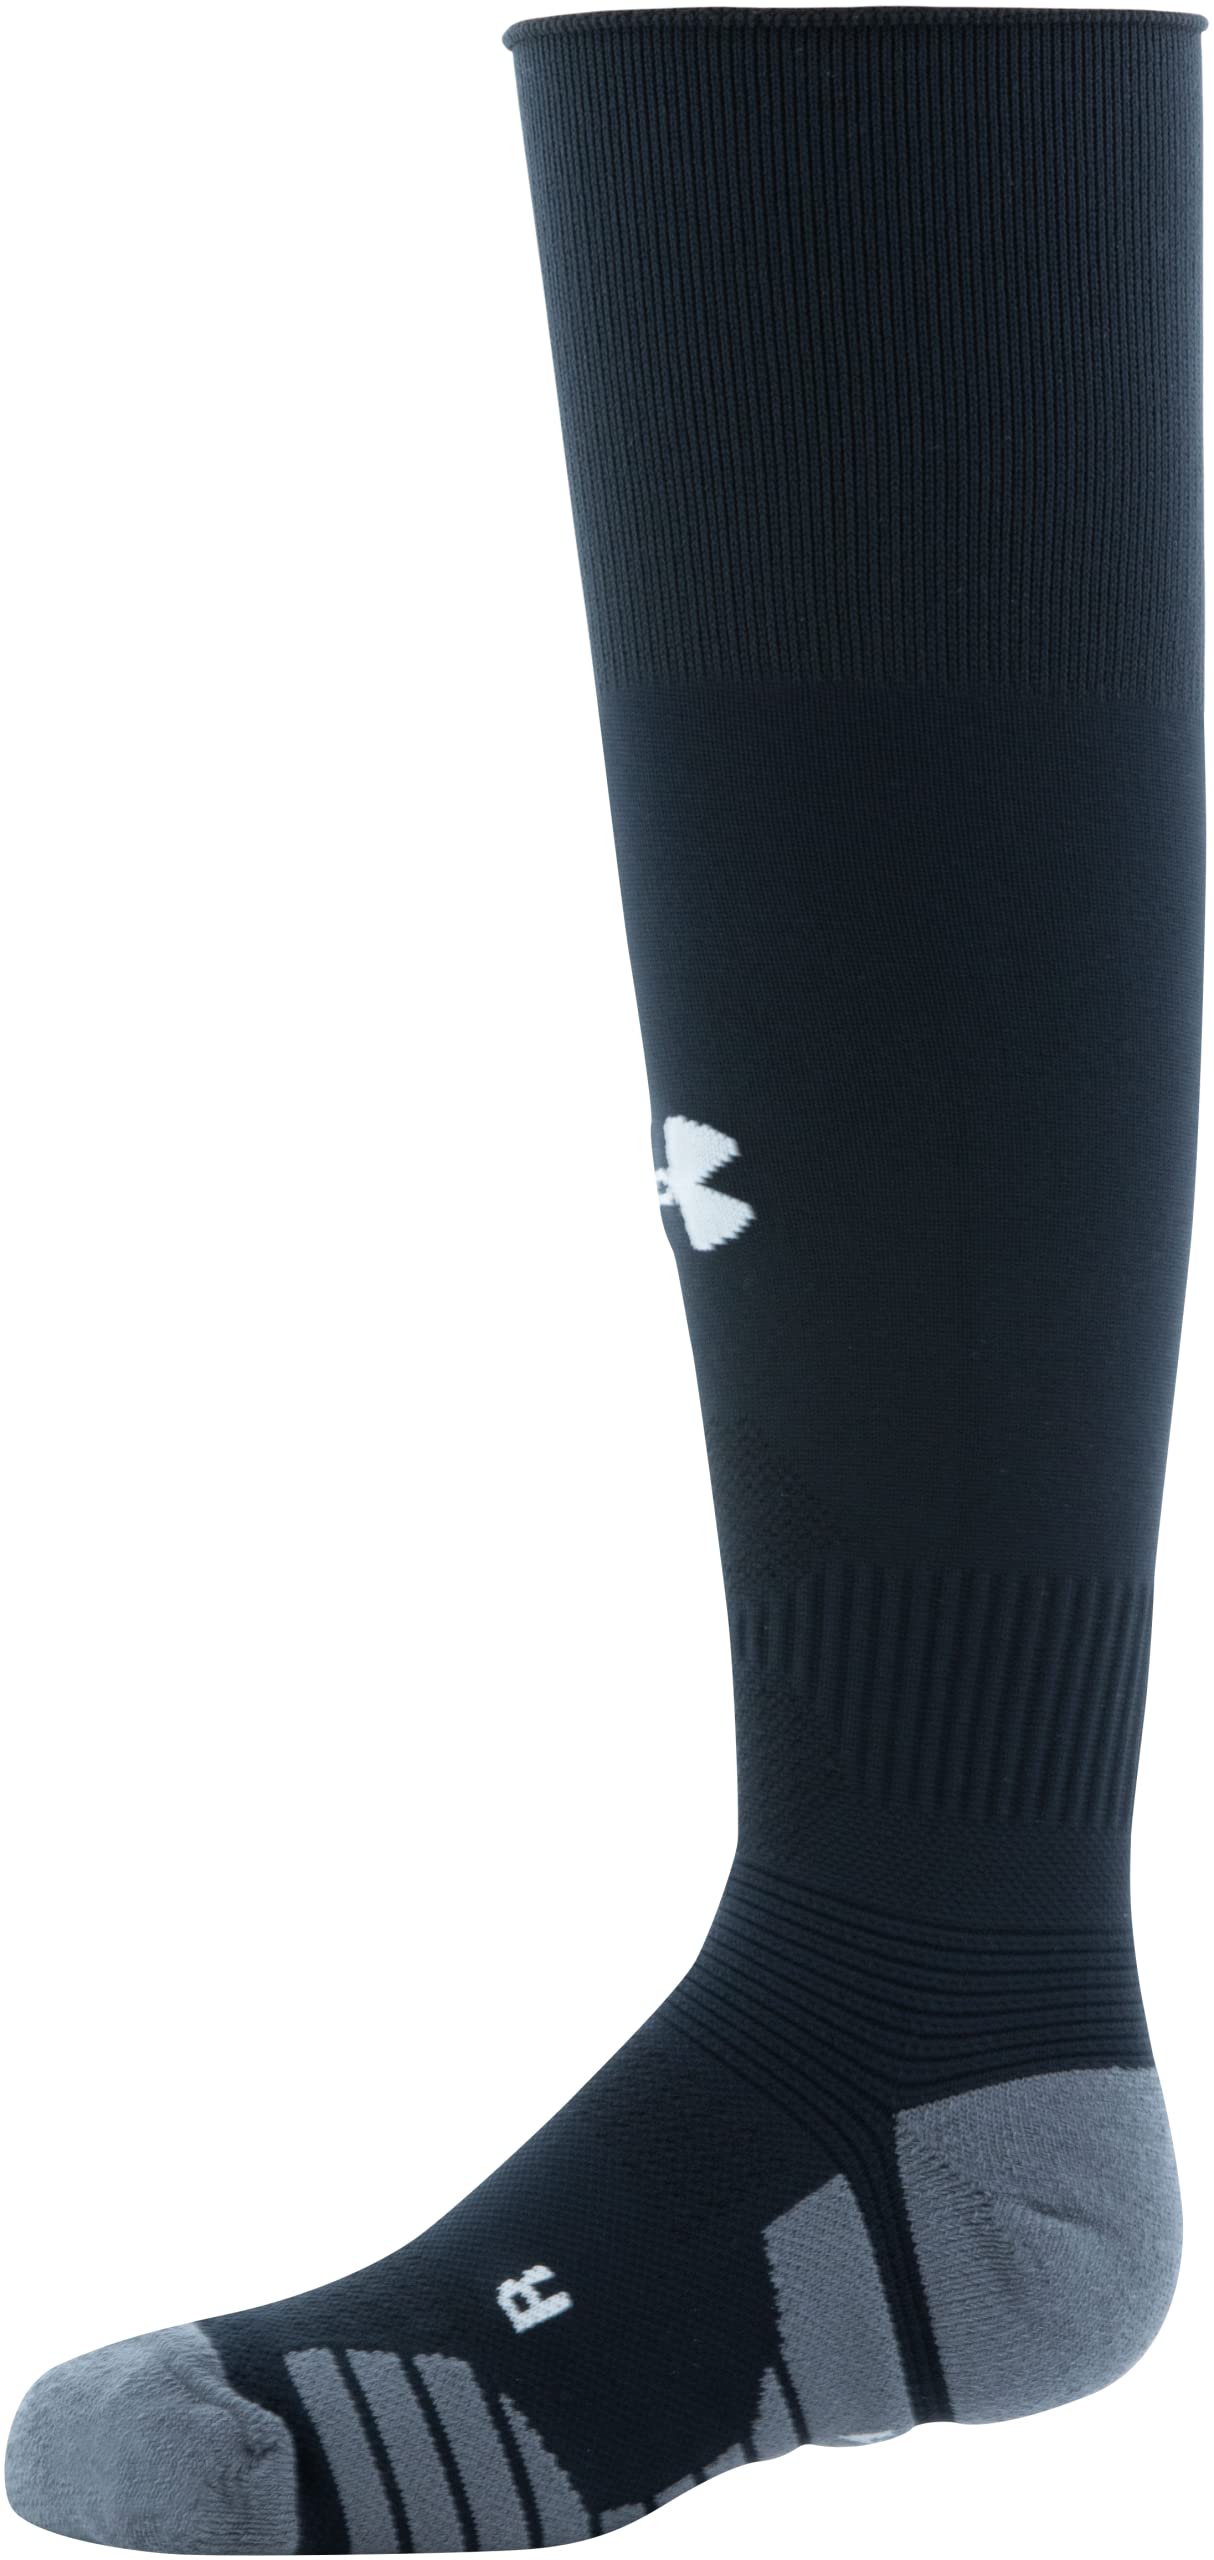 Under Armour Youth Soccer Over-The-Calf Socks